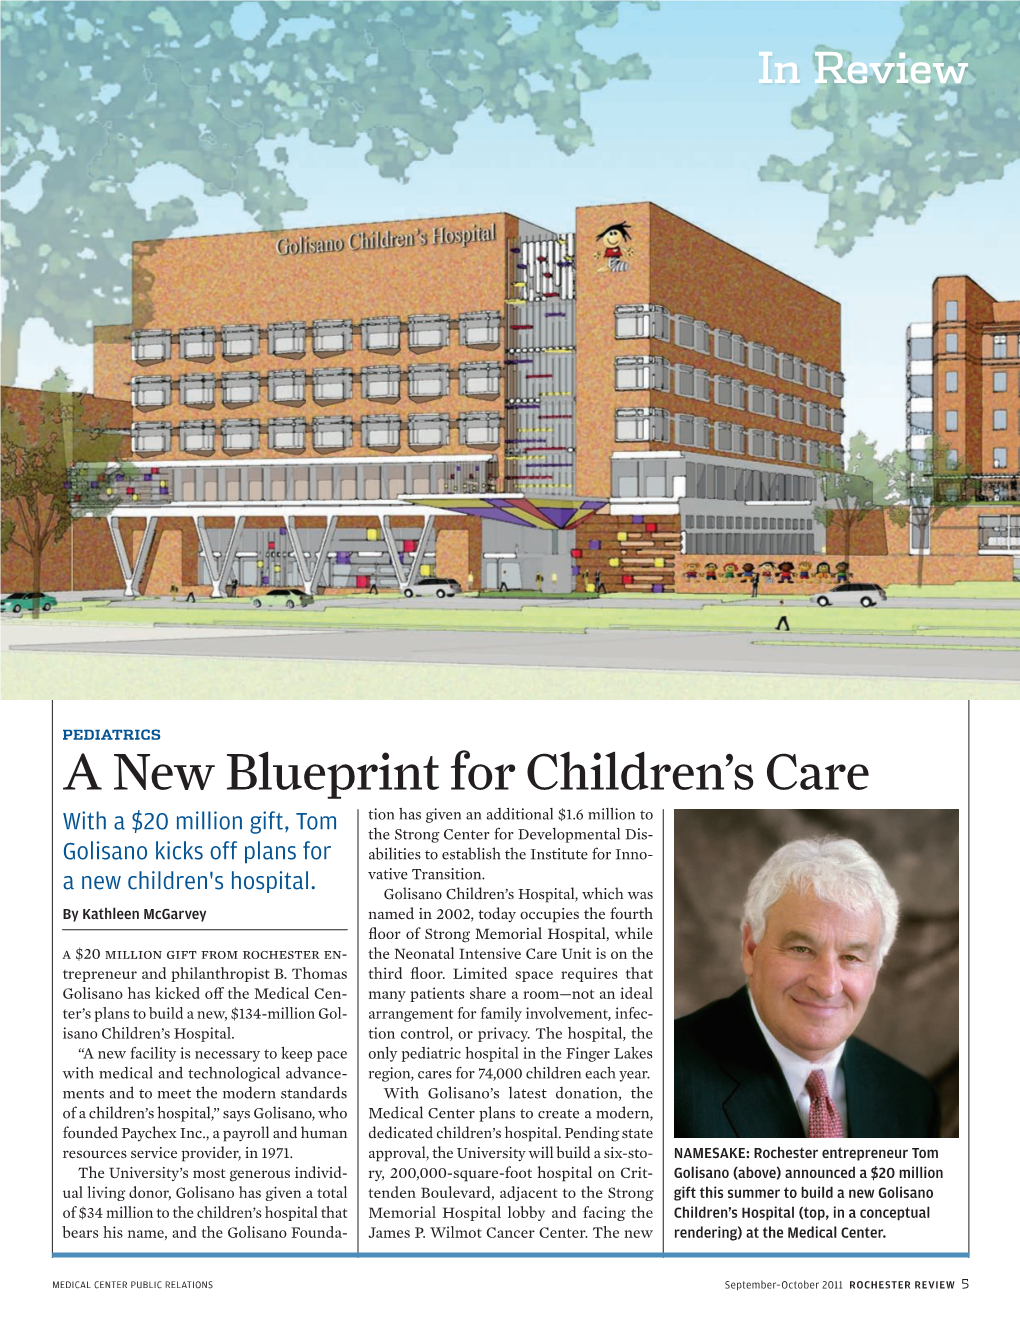 A New Blueprint for Children's Care